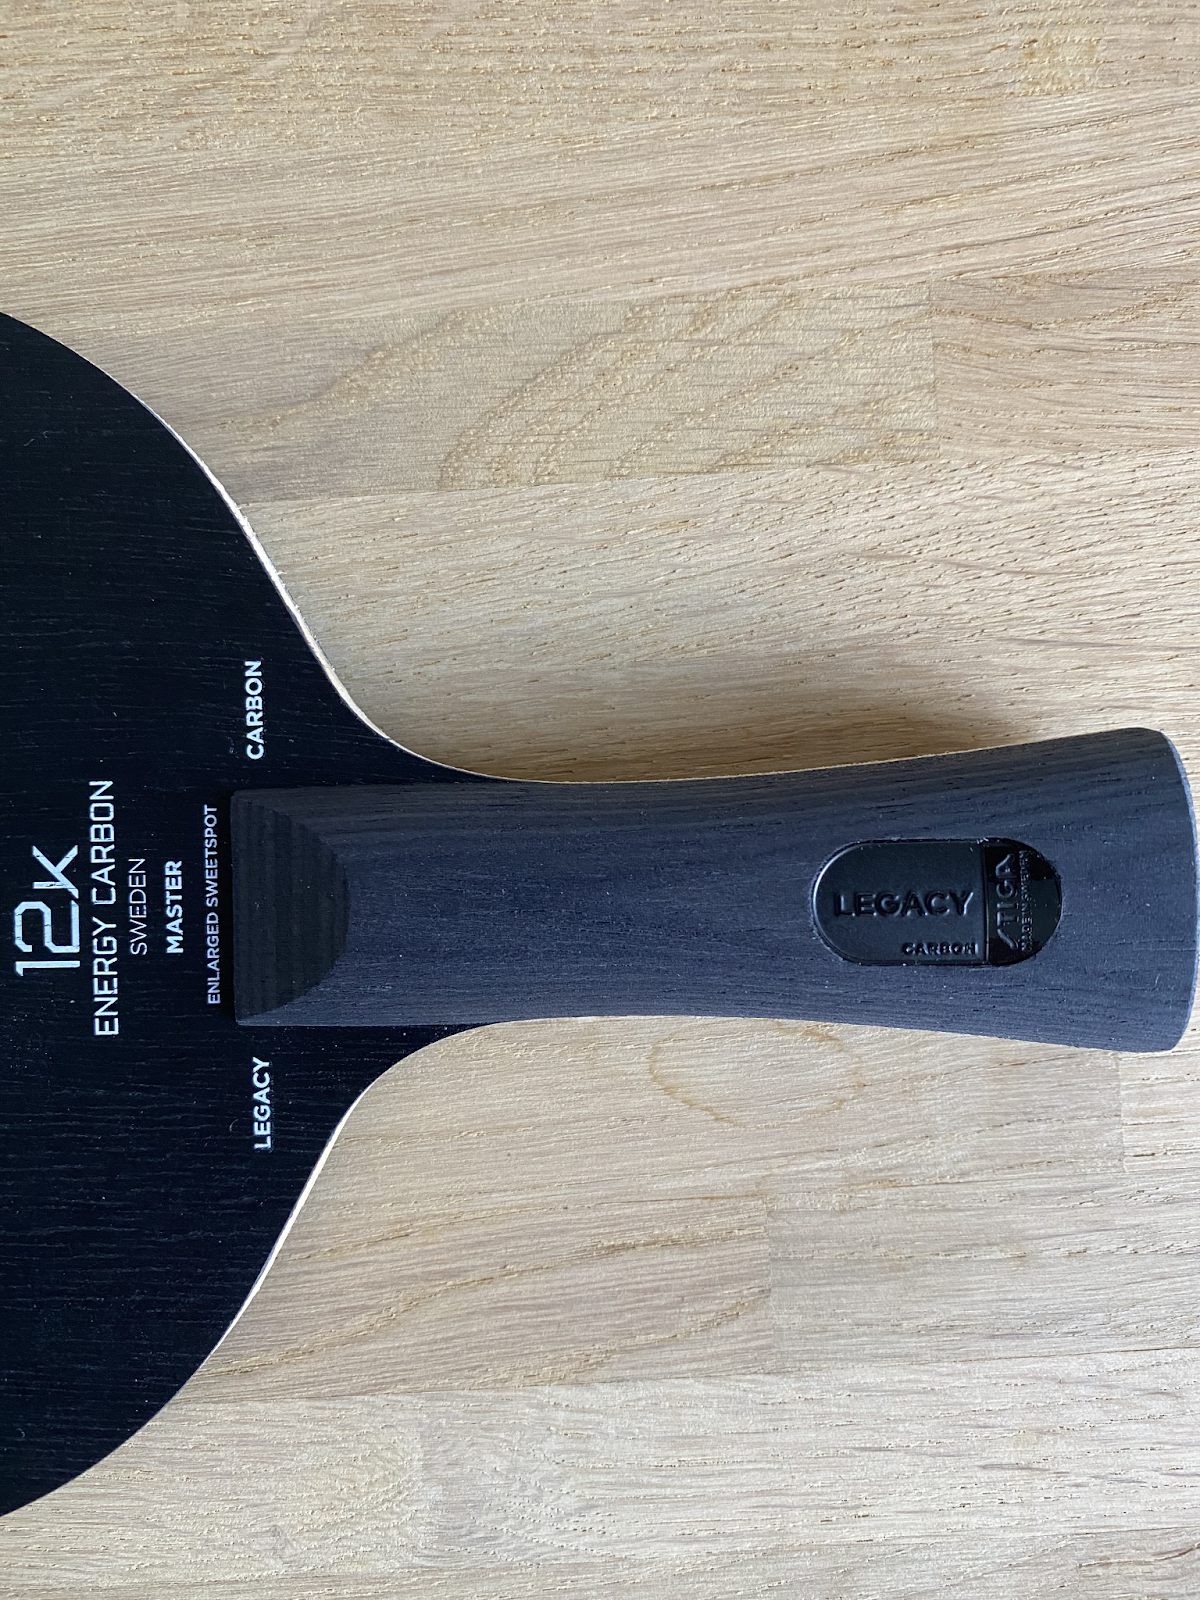 Stiga Legacy Carbon + DNA Pro H/M Review | TableTennisDaily